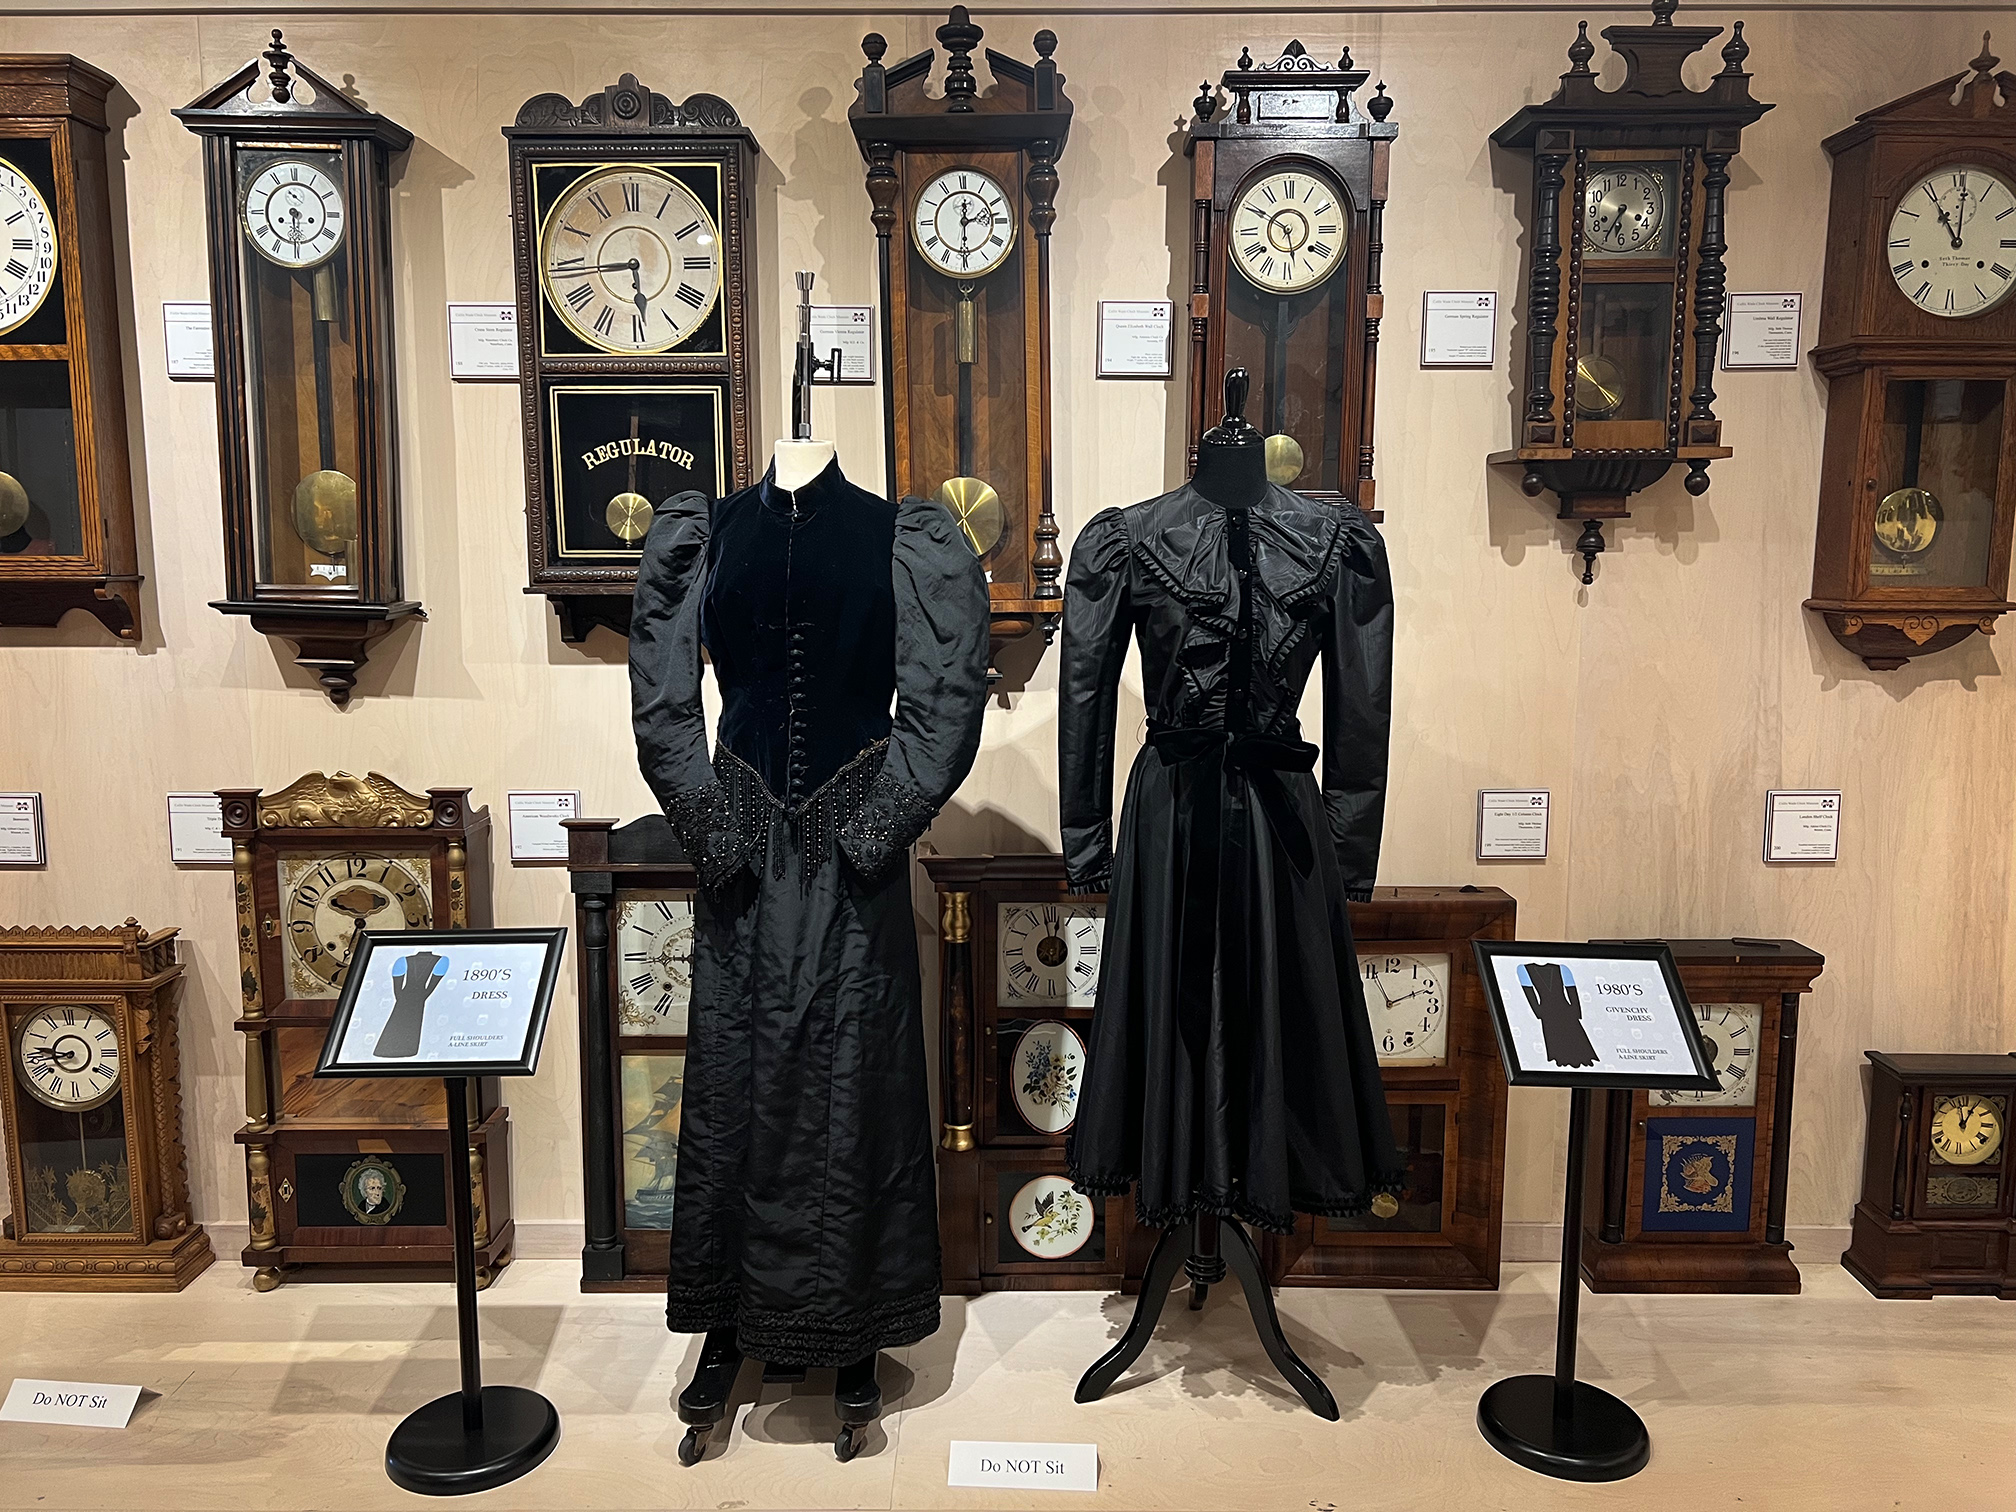 Two black dresses on display in front of a row of old clocks.